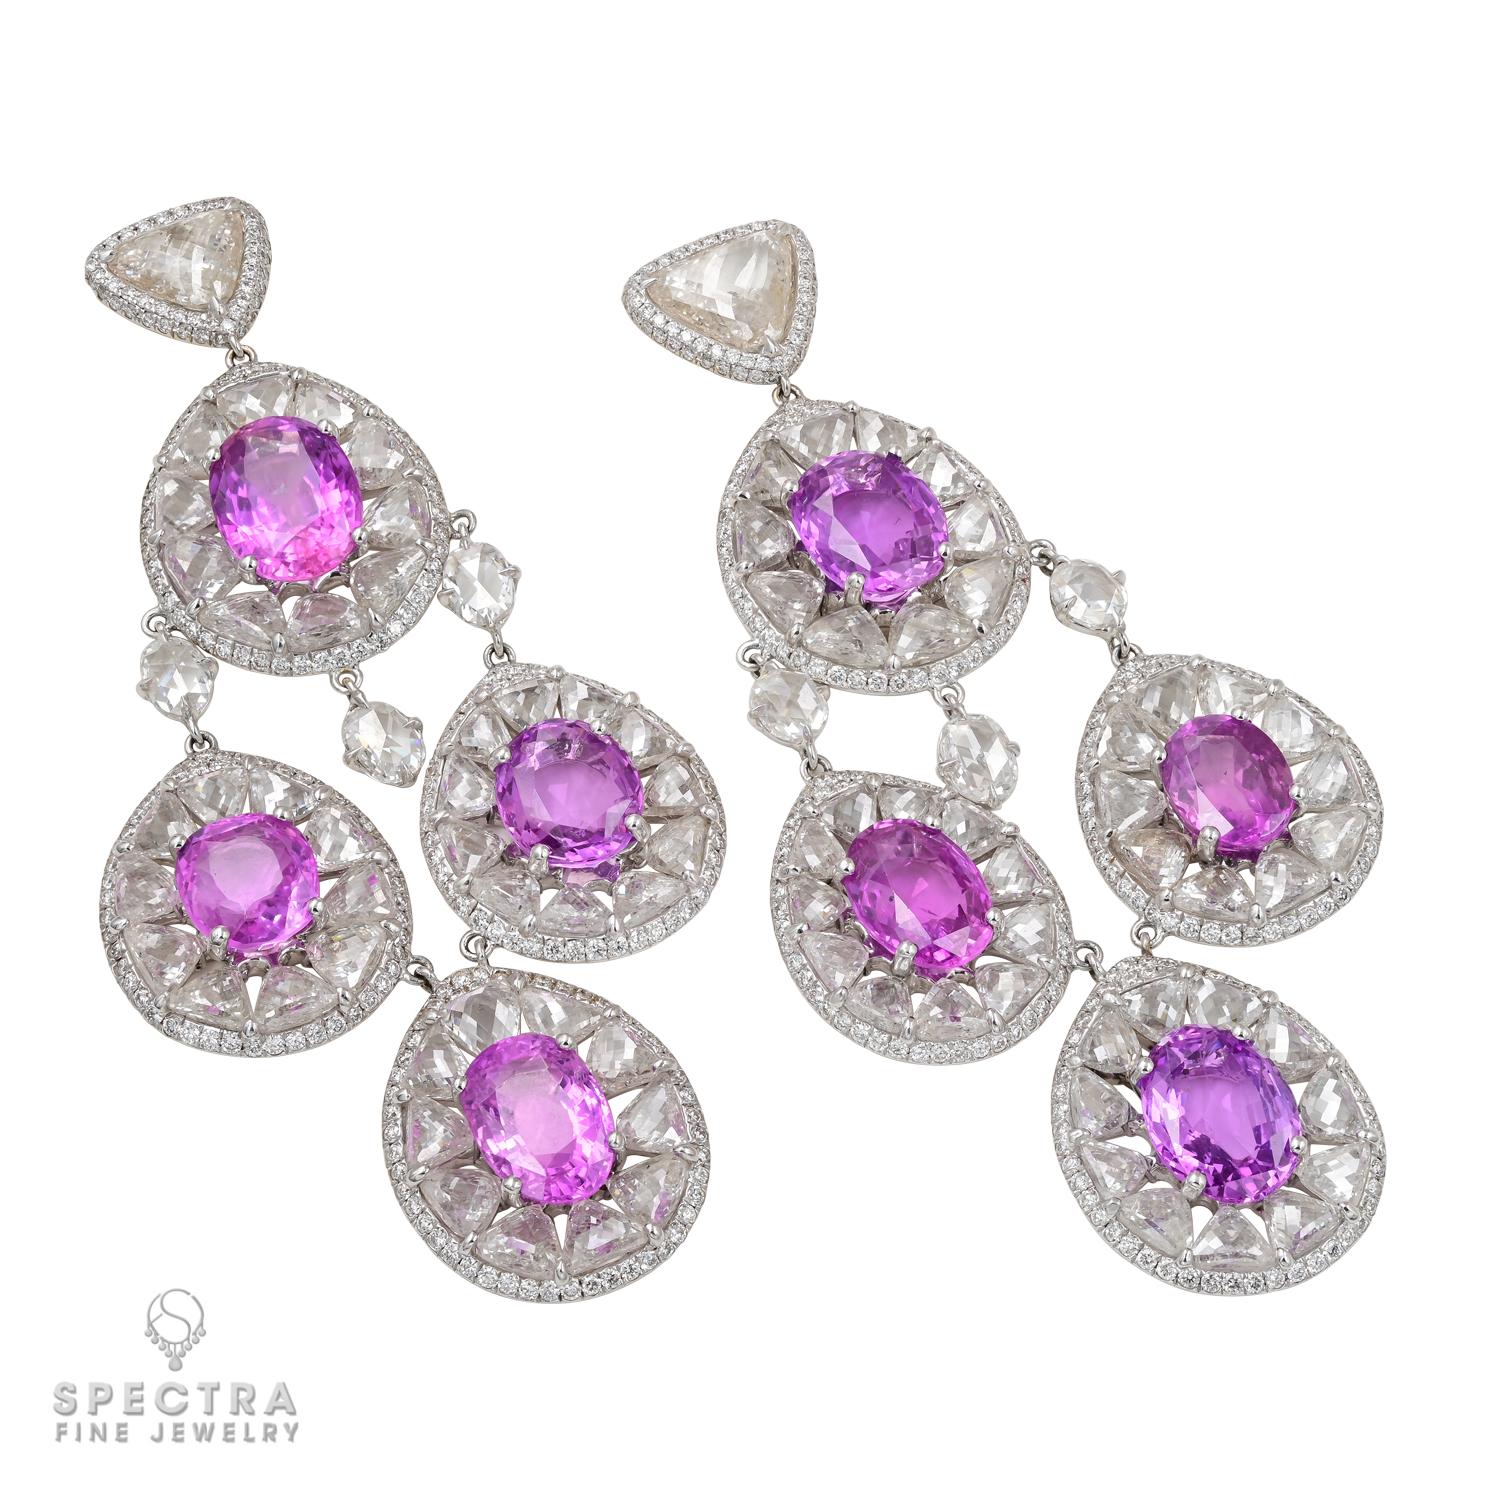 Introducing the epitome of elegance and sophistication - these Pink Sapphire Diamond Chandelier Earrings by Chopard, a dazzling testament to refined craftsmanship and timeless design. Crafted with meticulous precision, each earring is a harmonious